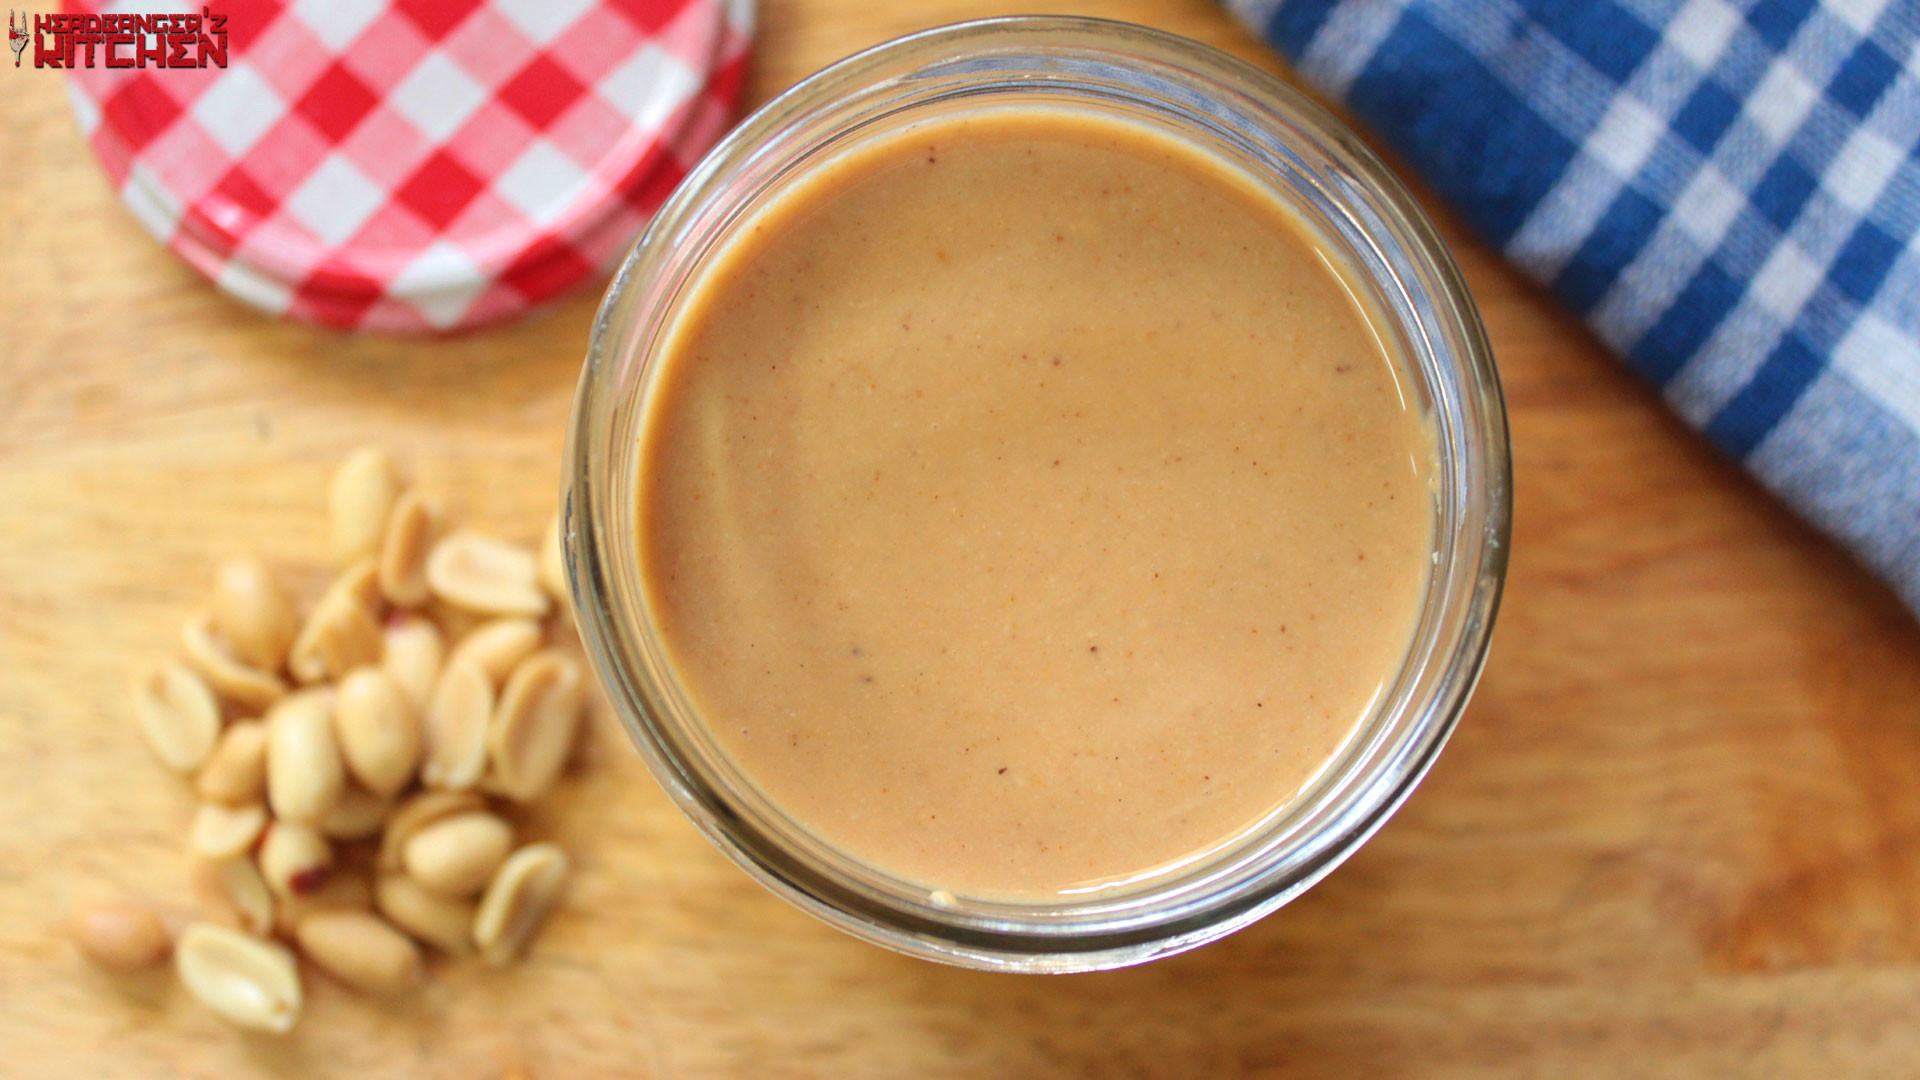 Can You Eat Peanut Butter On A Keto Diet
 Keto Peanut Butter Headbanger s Kitchen Keto All The Way